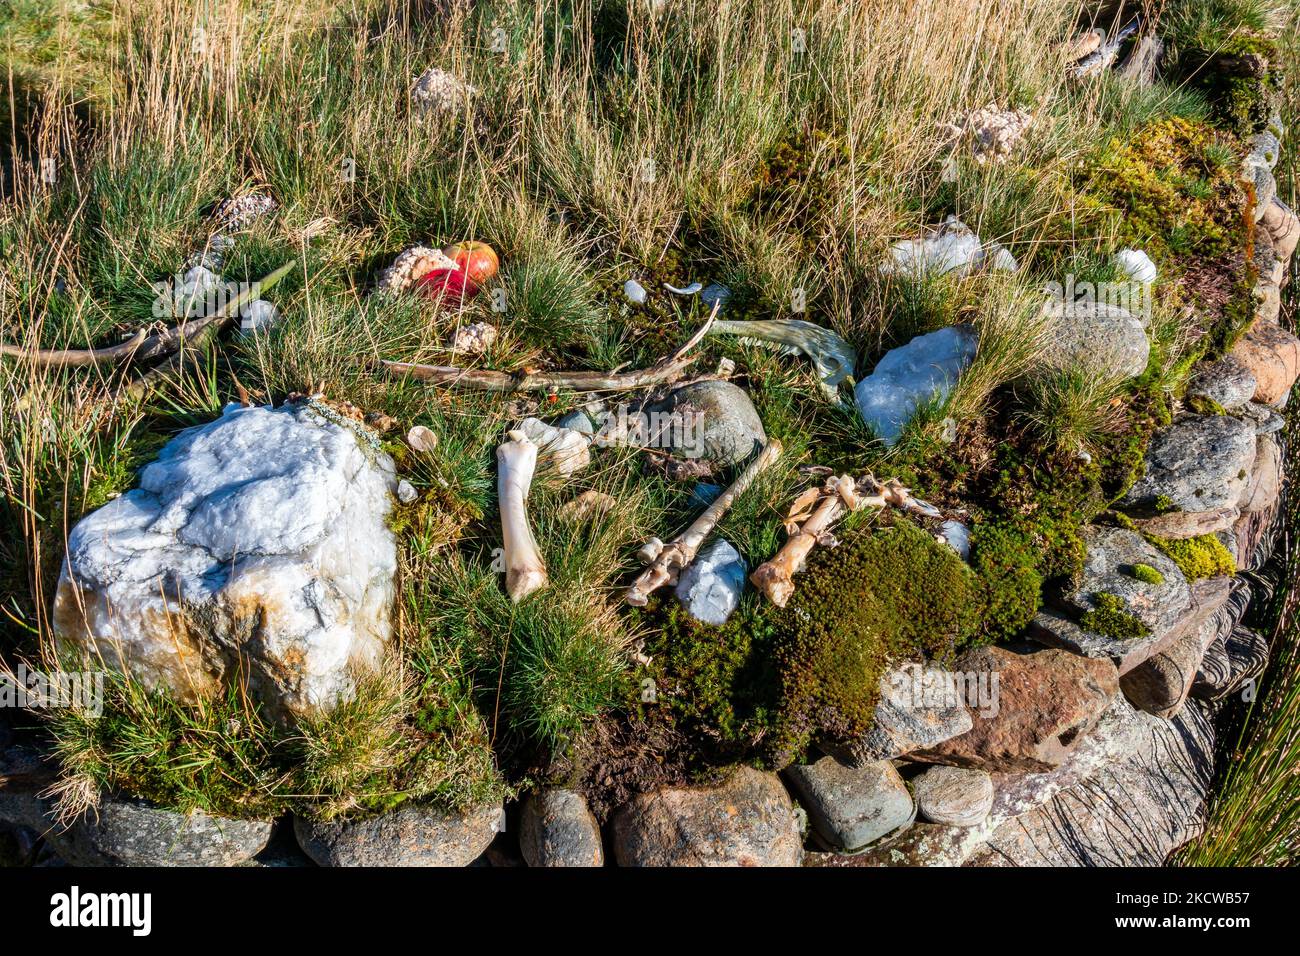 Bones left at the pagan shrine of Tigh Nam Bodach, or Tigh Nam Cailliche near Loch Lyon in Perthshire, Scotland, which contains sacred river stones Stock Photo